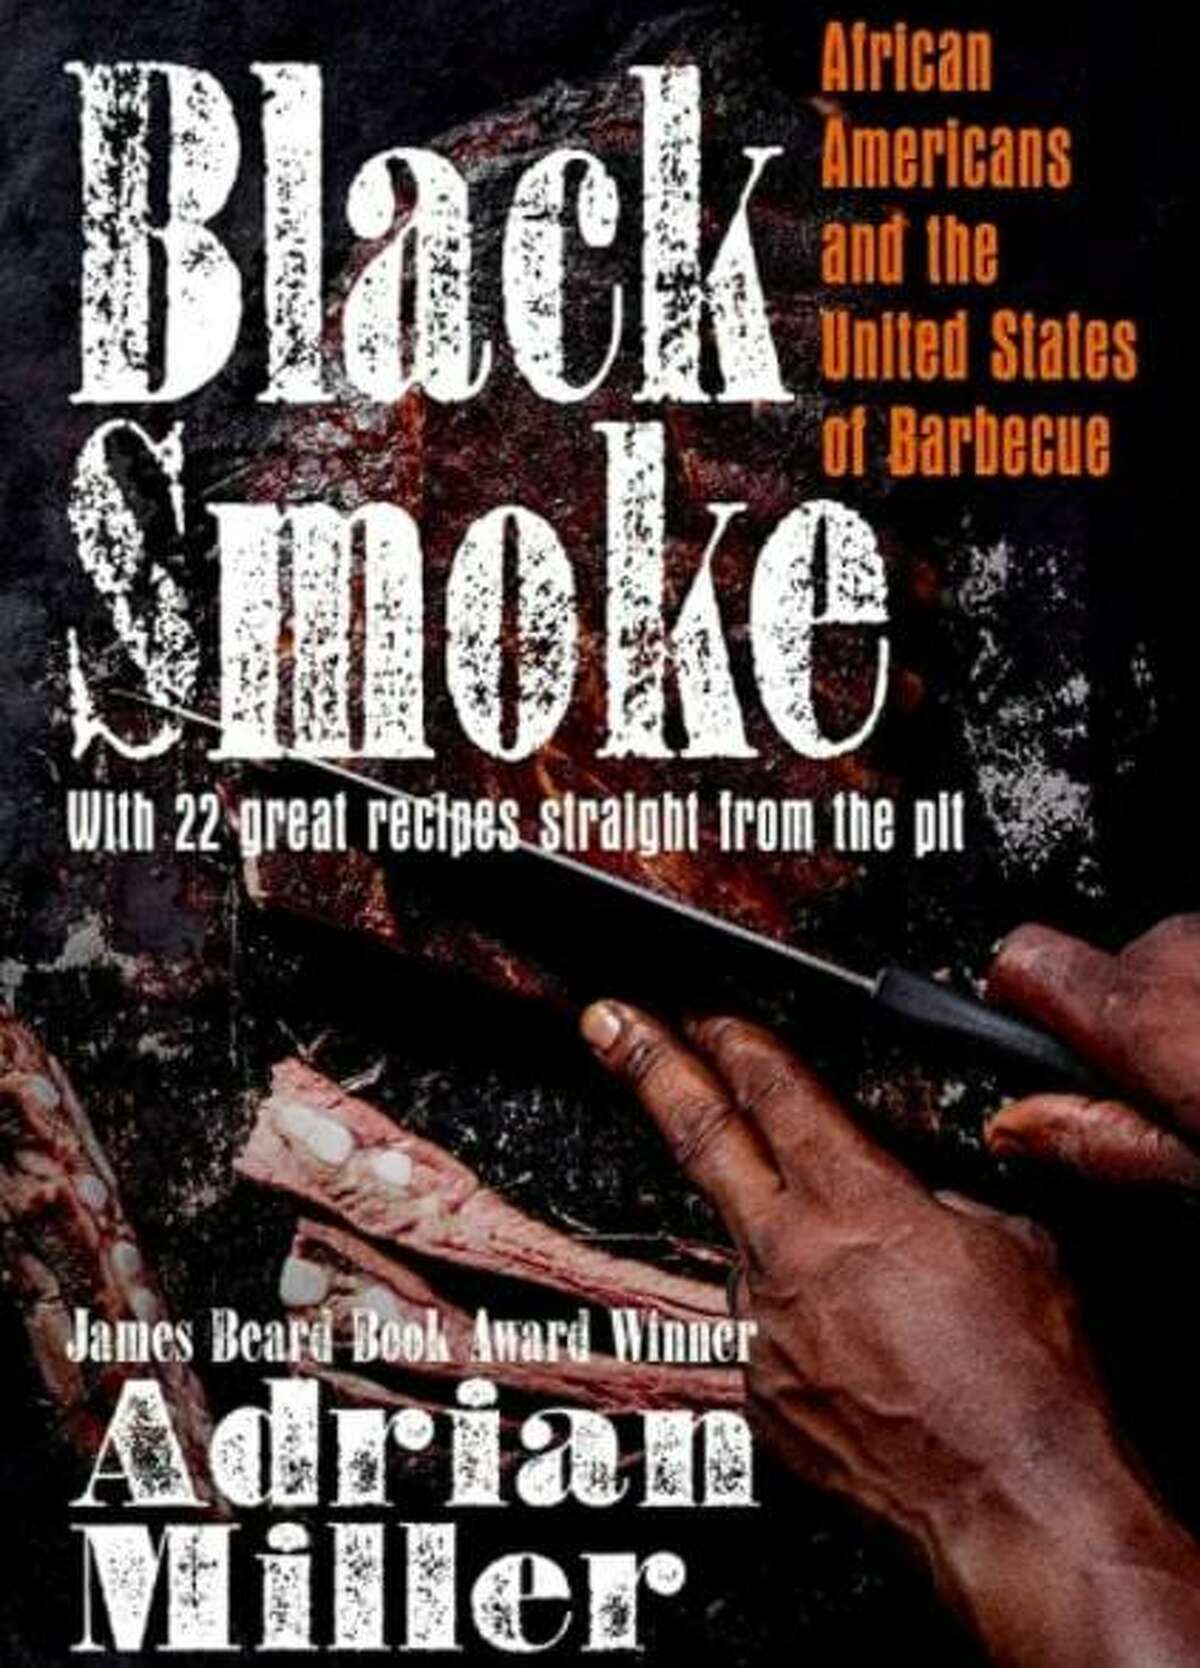 Adrian Miller published "Black Smoke: African Americans and the United States of Barbecue" in April 2021.